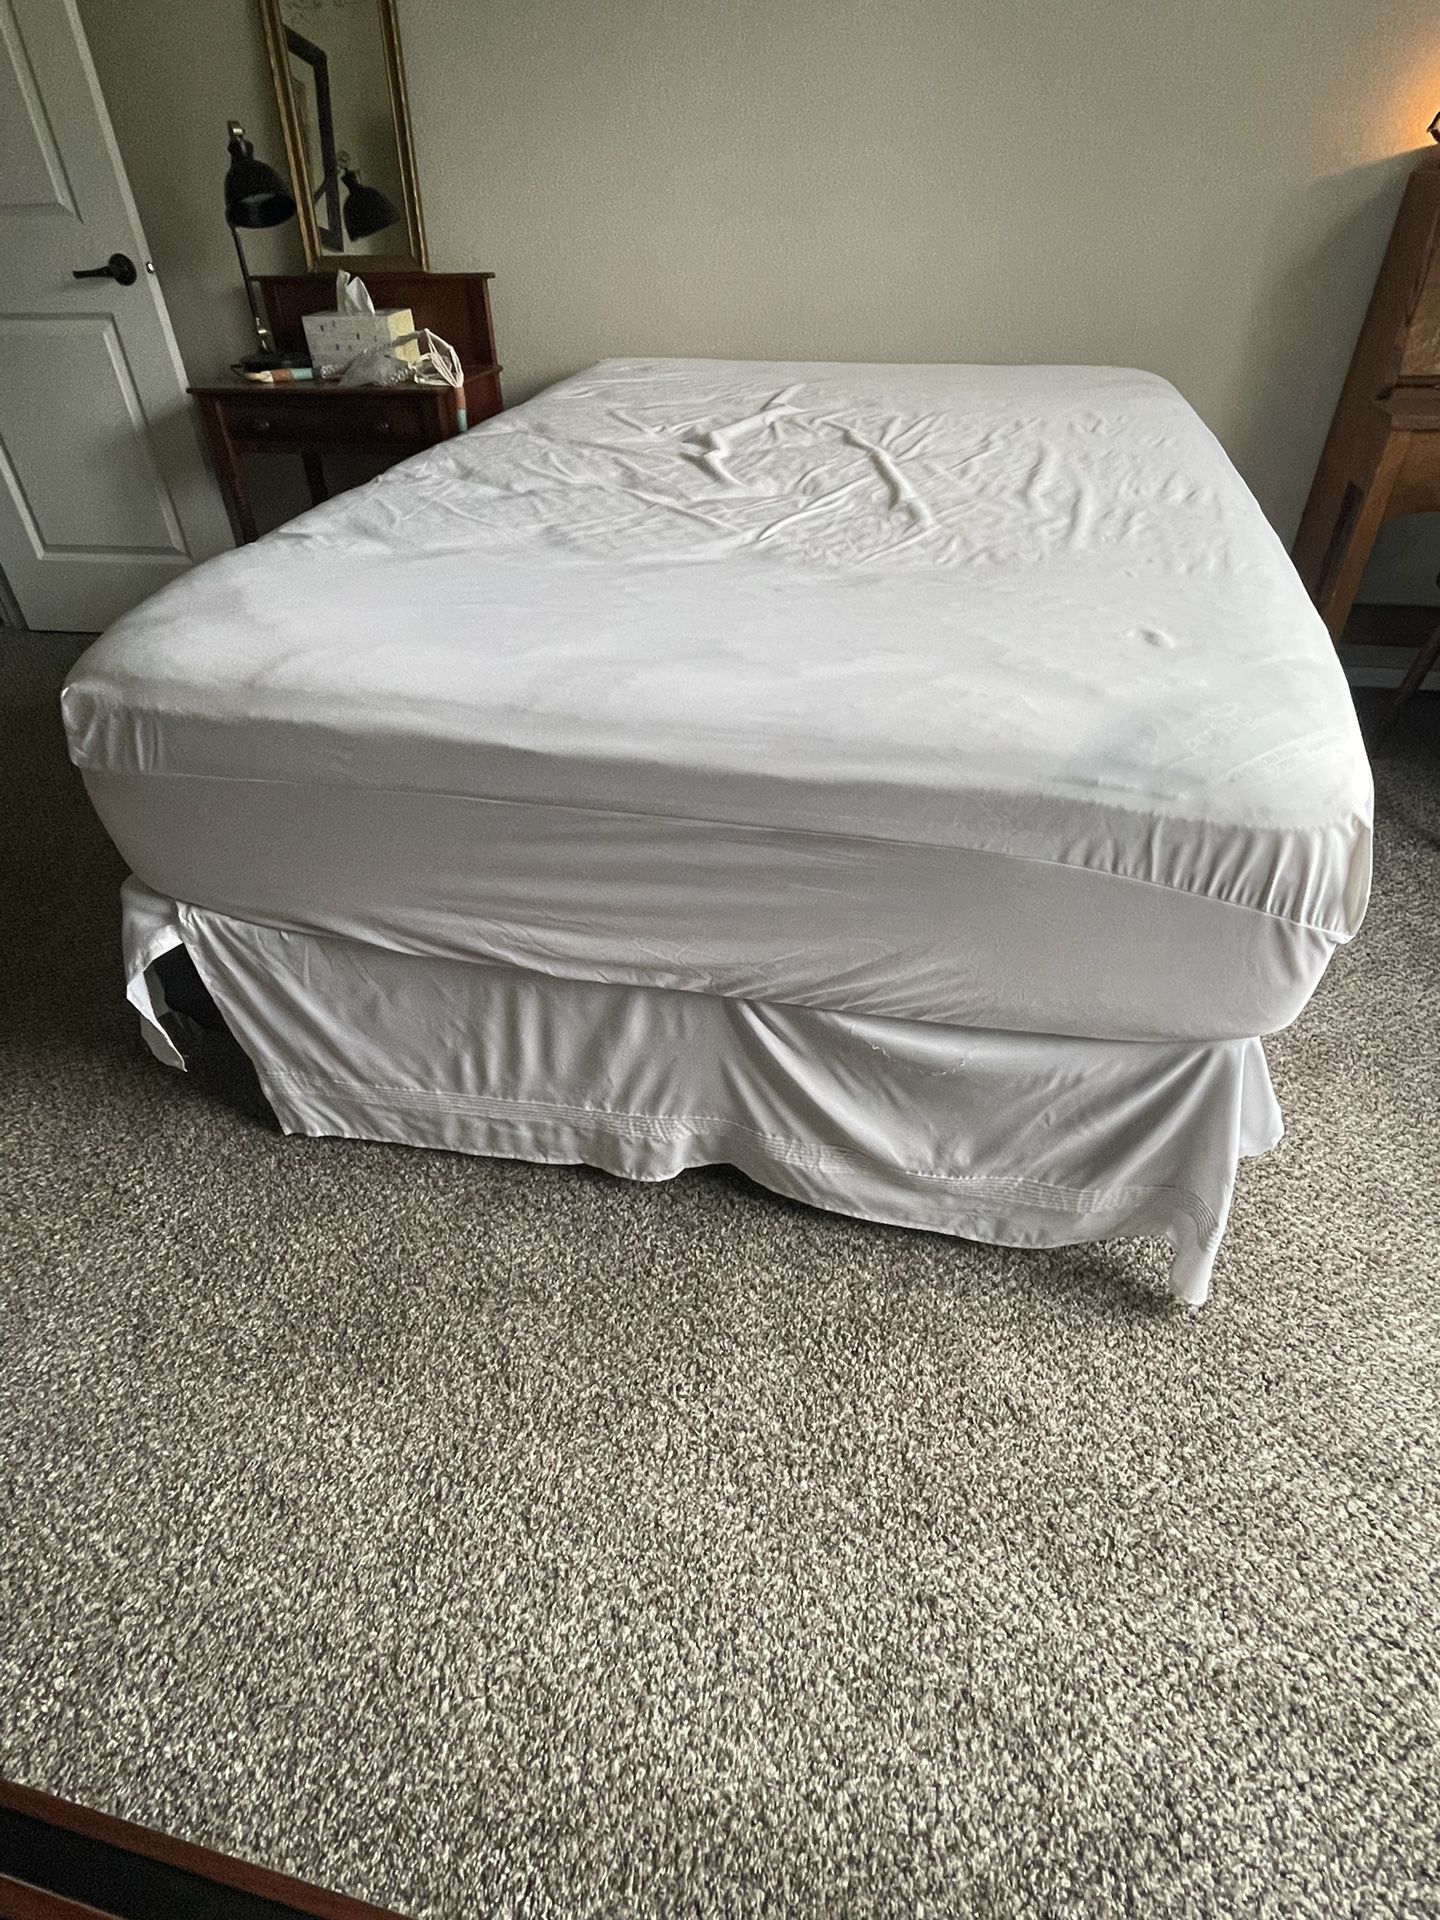 Box Spring And Mattress (Frame Sold Separately)